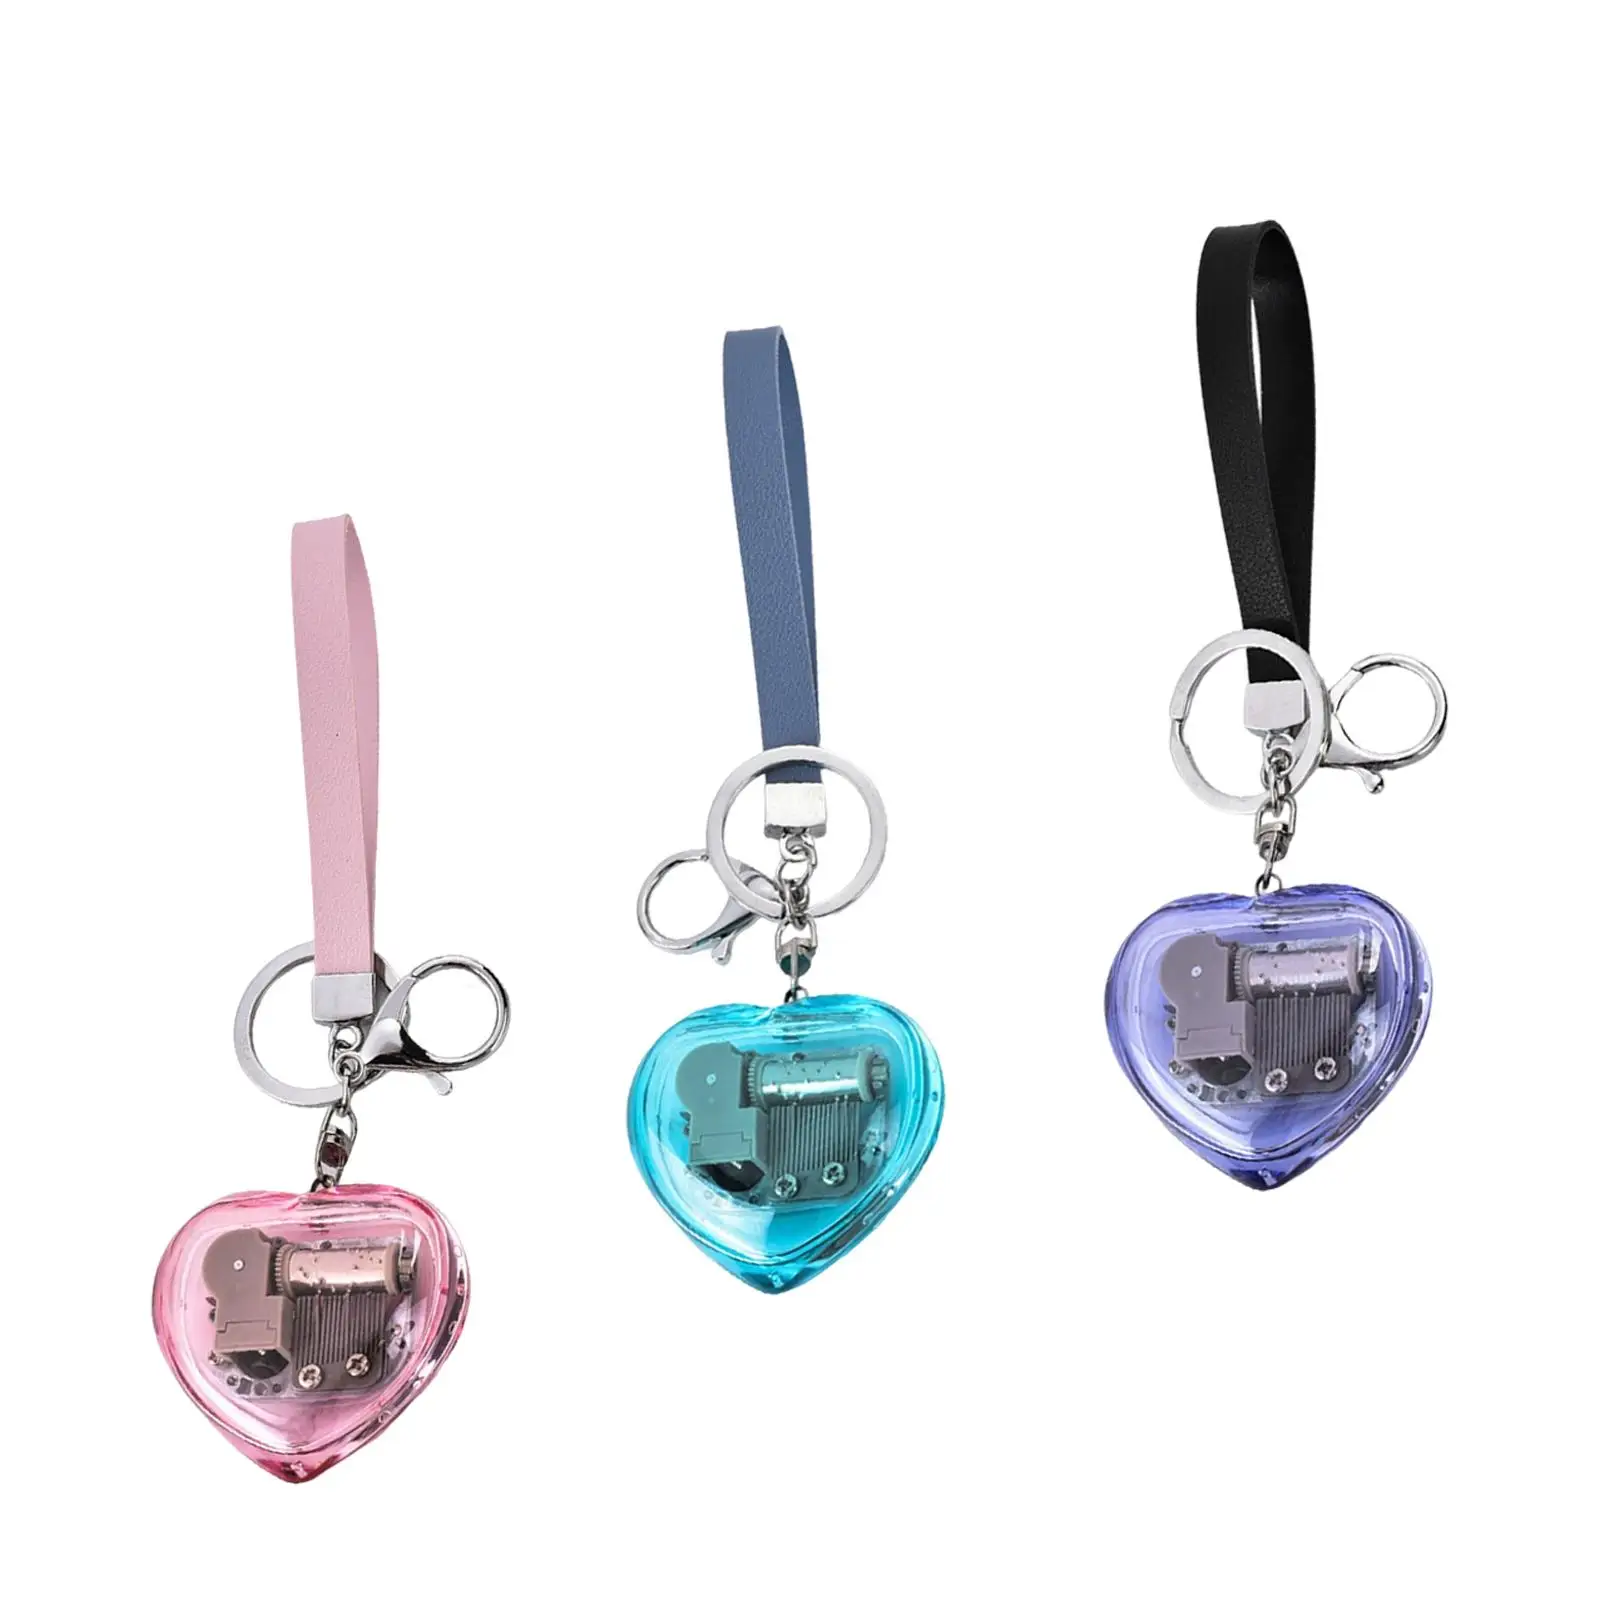 Heart Shaped Key Chain with Music Box Hanging Pendant Decor Ornaments for Car Purse Bedroom Living Room Music Teachers Gifts